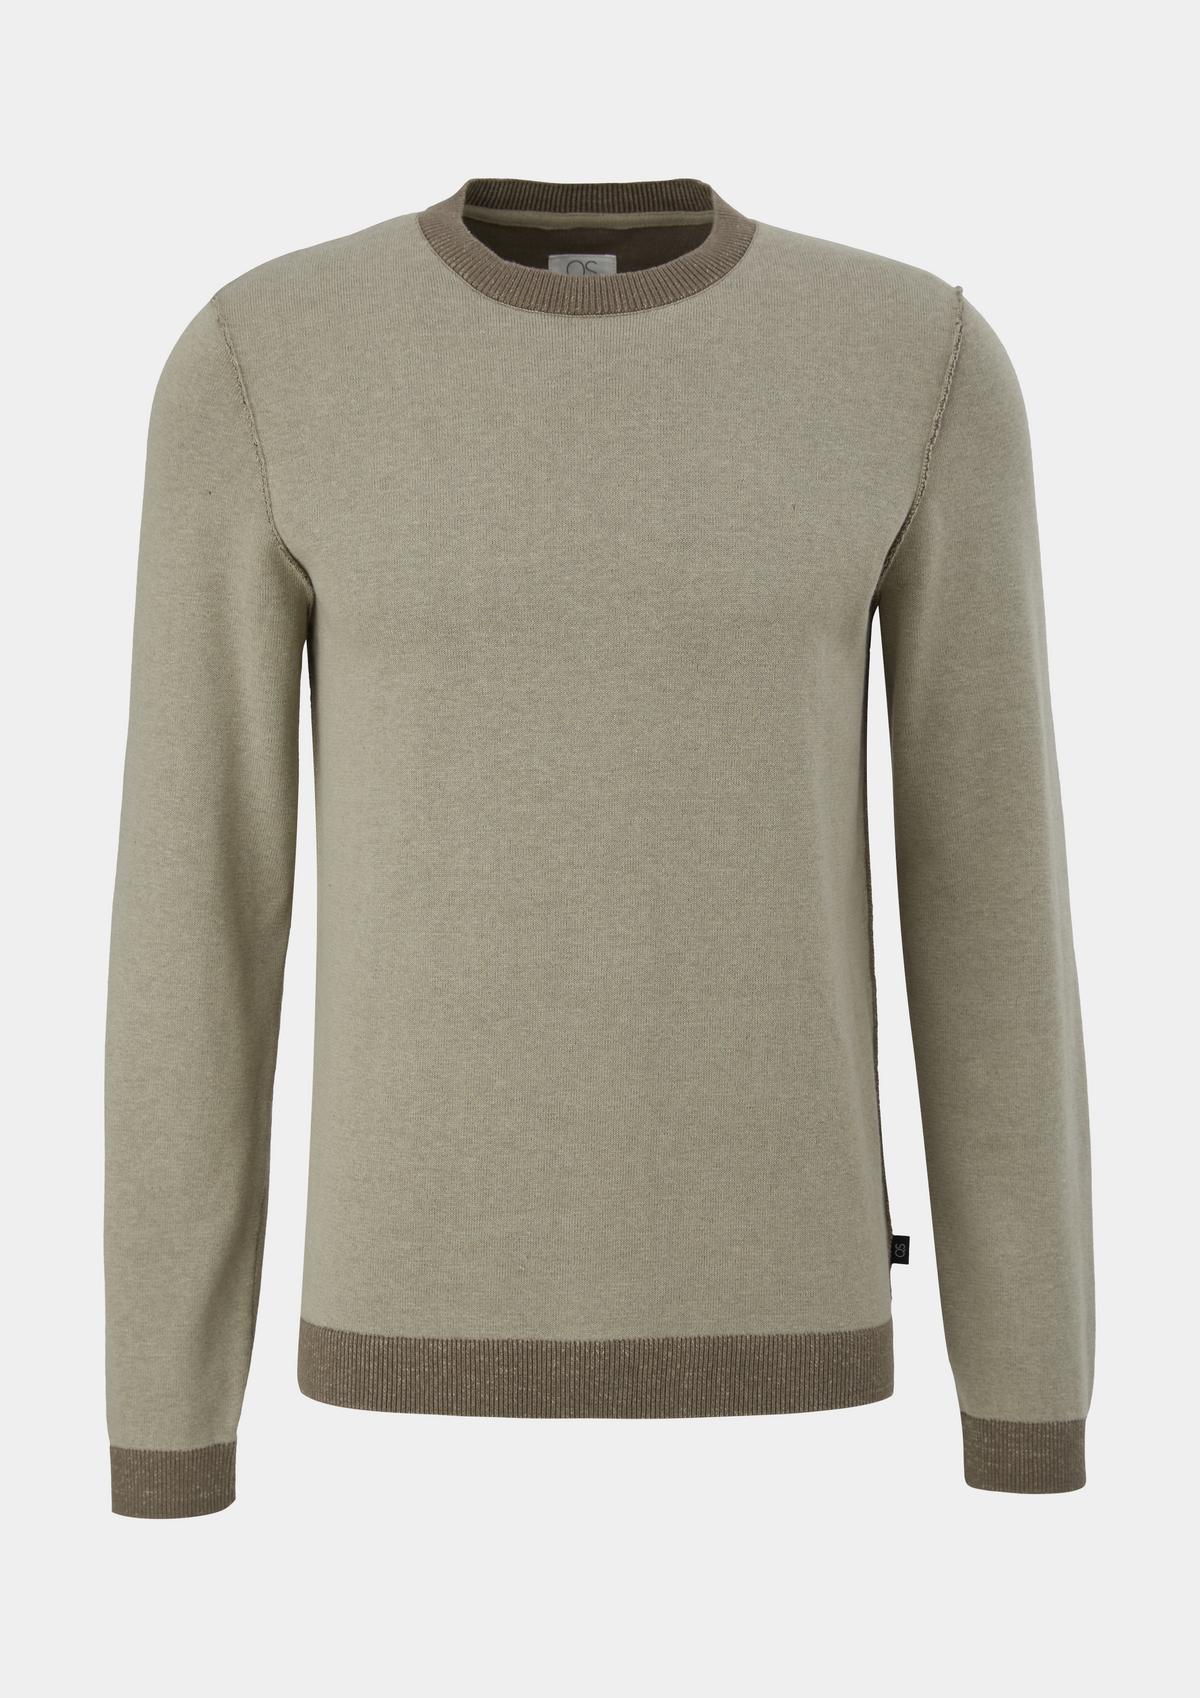 s.Oliver Fine knit jumper with an inside-out look